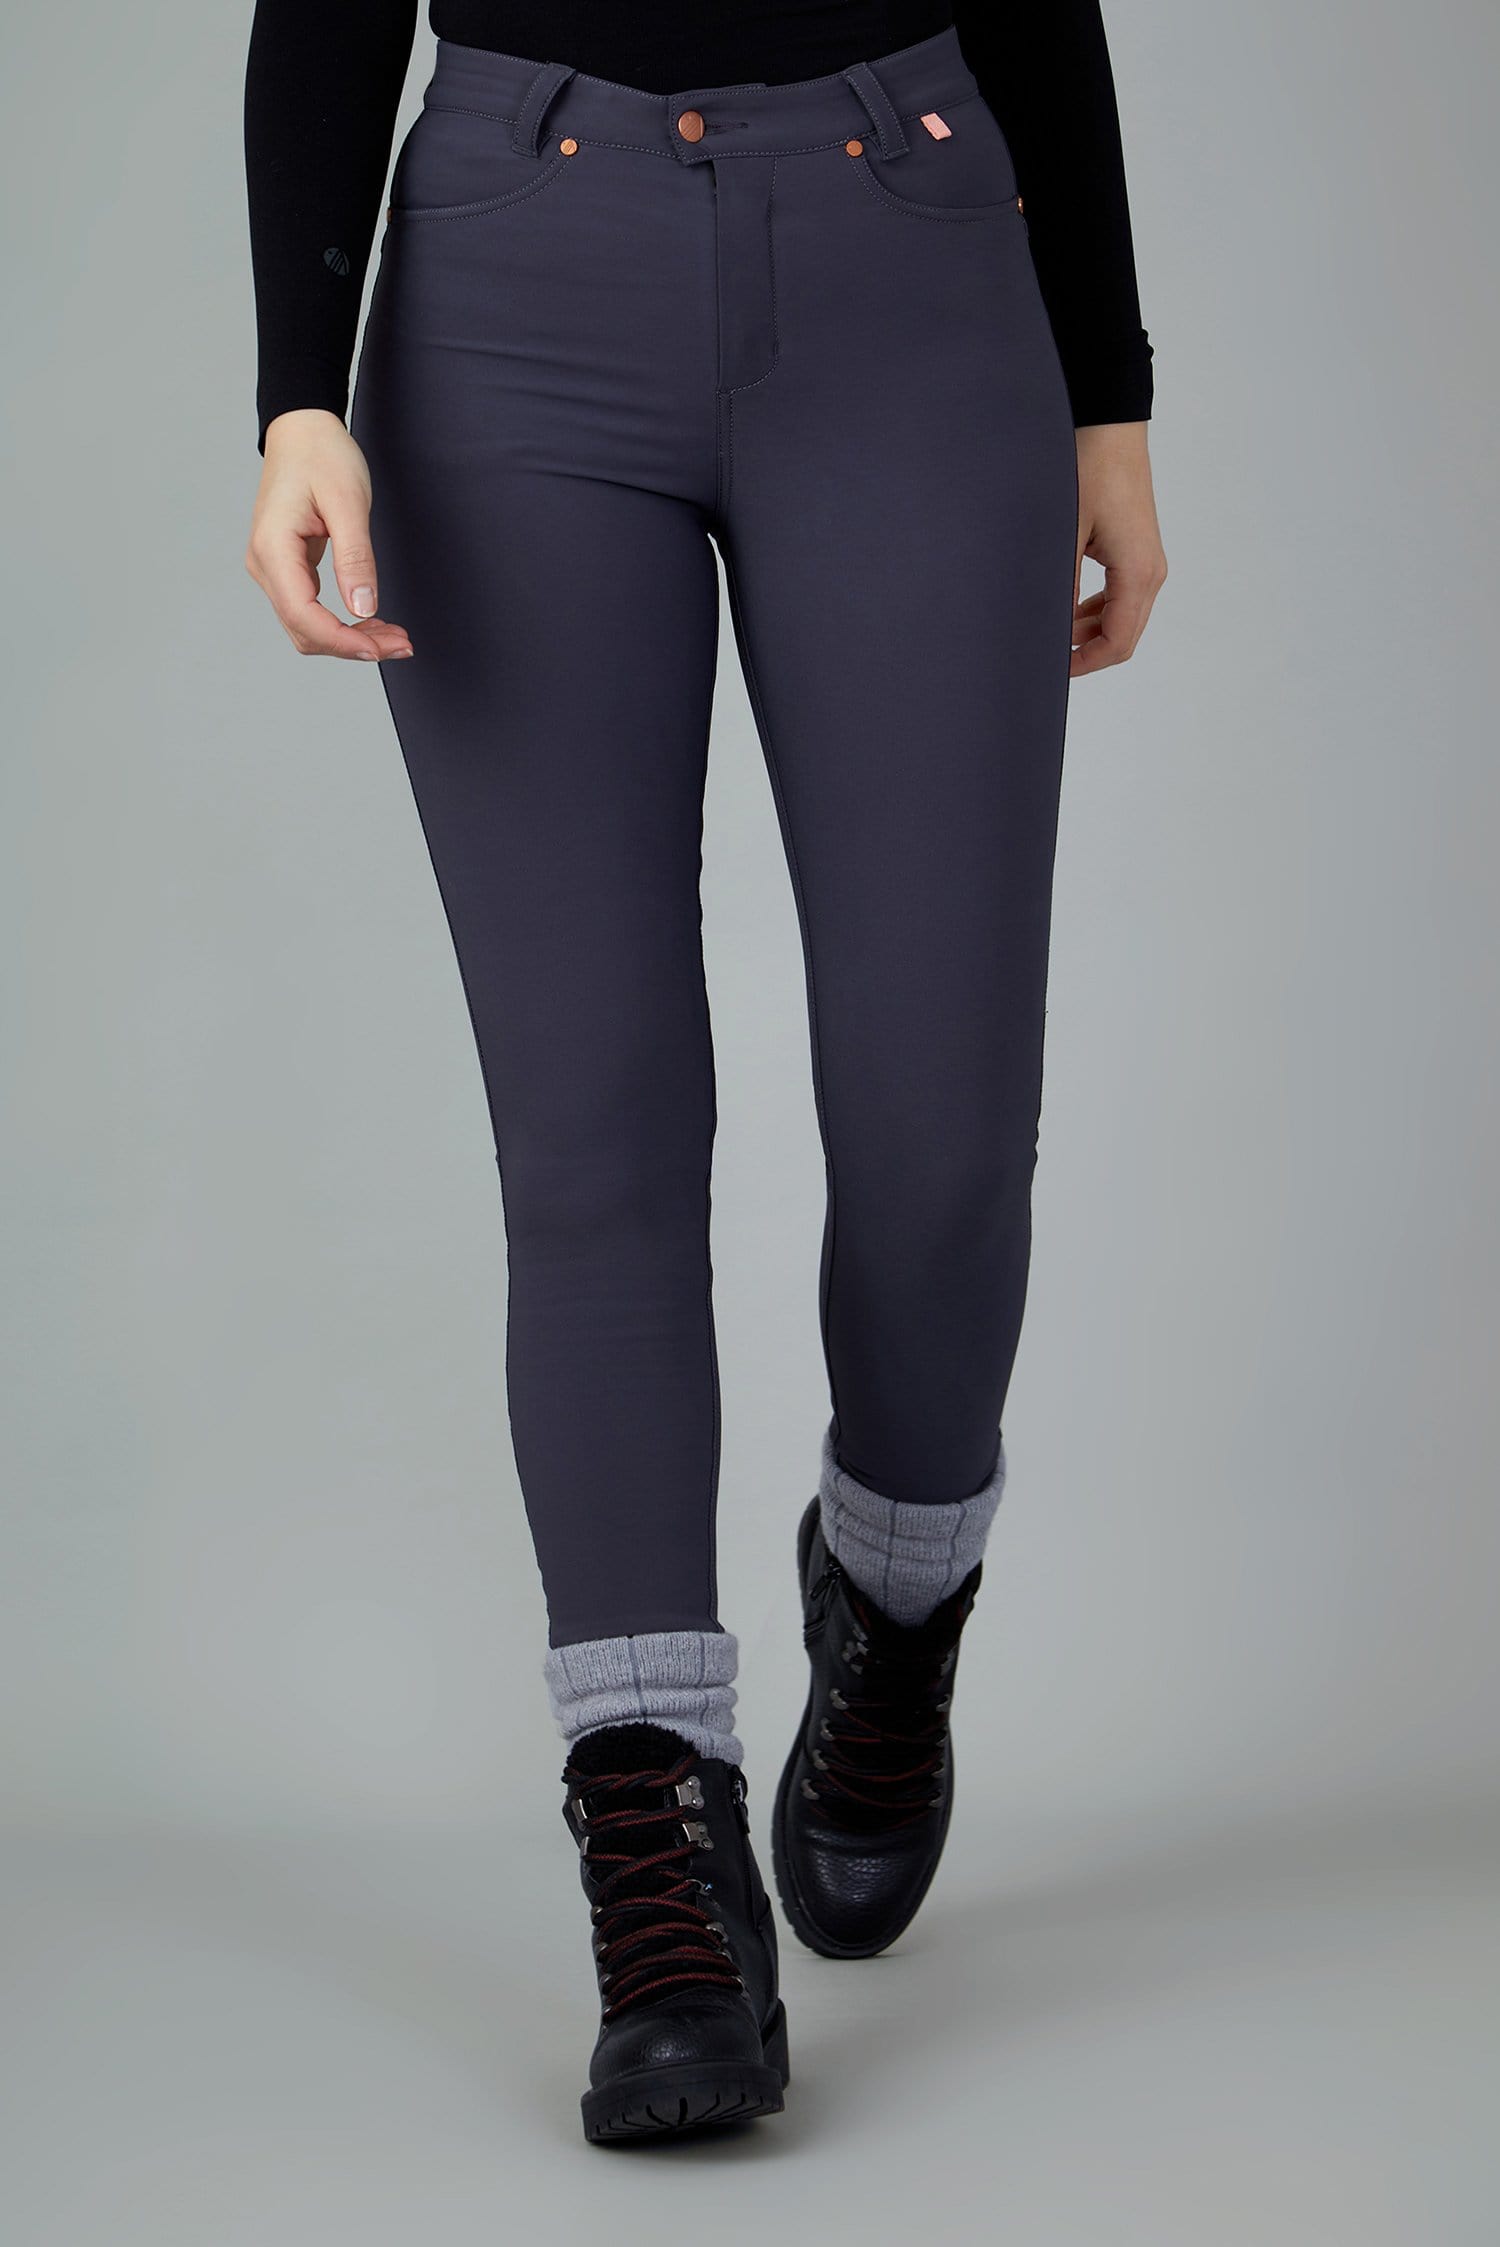 The Aventurite Stretch Skinny Outdoor Trousers - Obsidian - 36r / Uk18 - Womens - Acai Outdoorwear